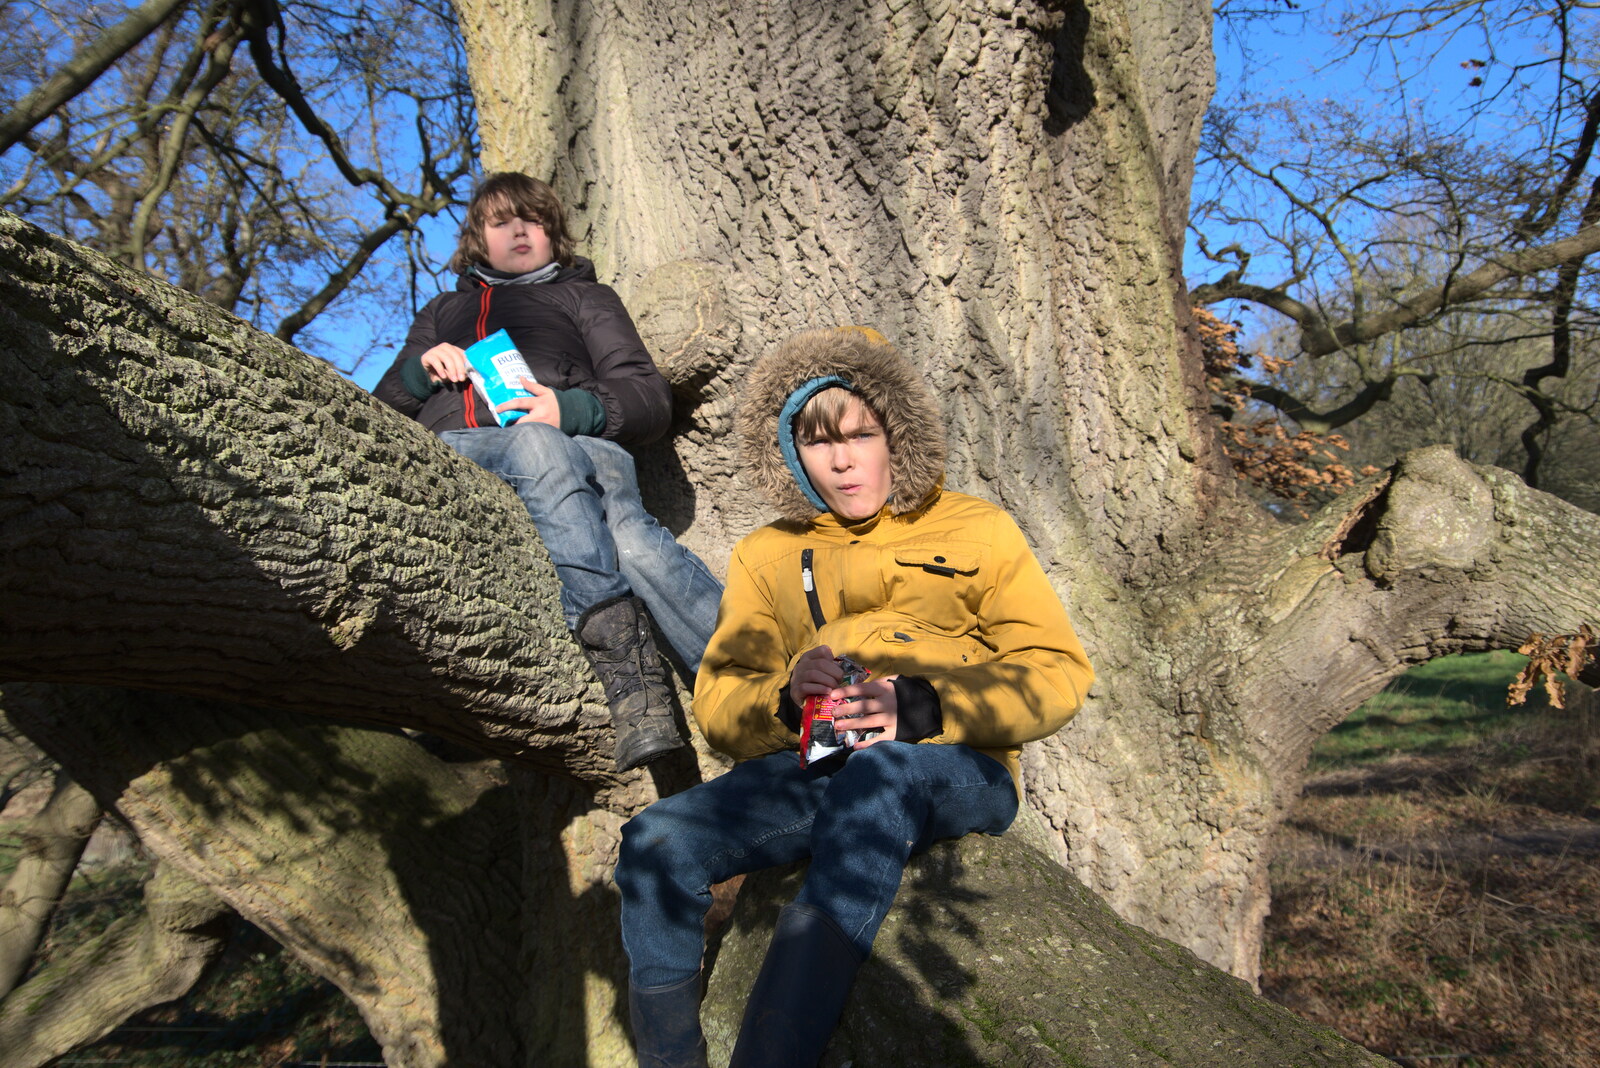 The boys eat crisps in the massive tree from A Visit to Blickling Hall, Aylsham, Norfolk - 9th January 2022